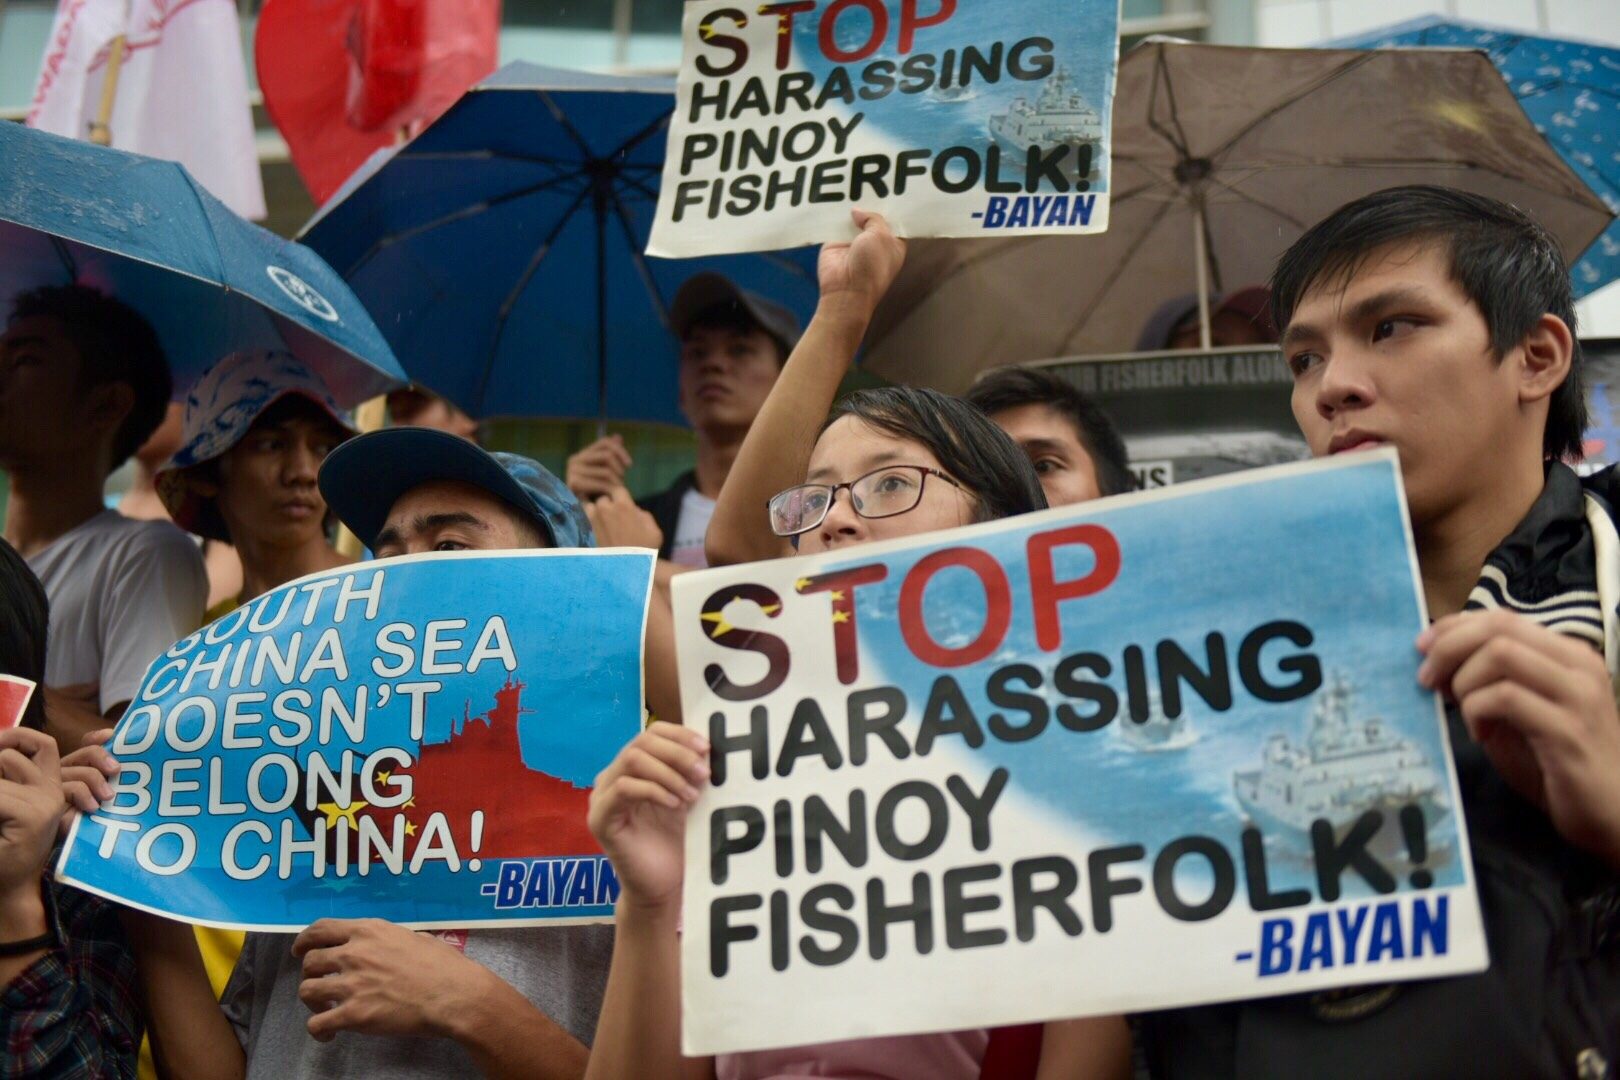 STOP HARASSMENT. Protesters call on Chinese authorities to stop harassing Filipino fishermen on Scarborough Shoal.  